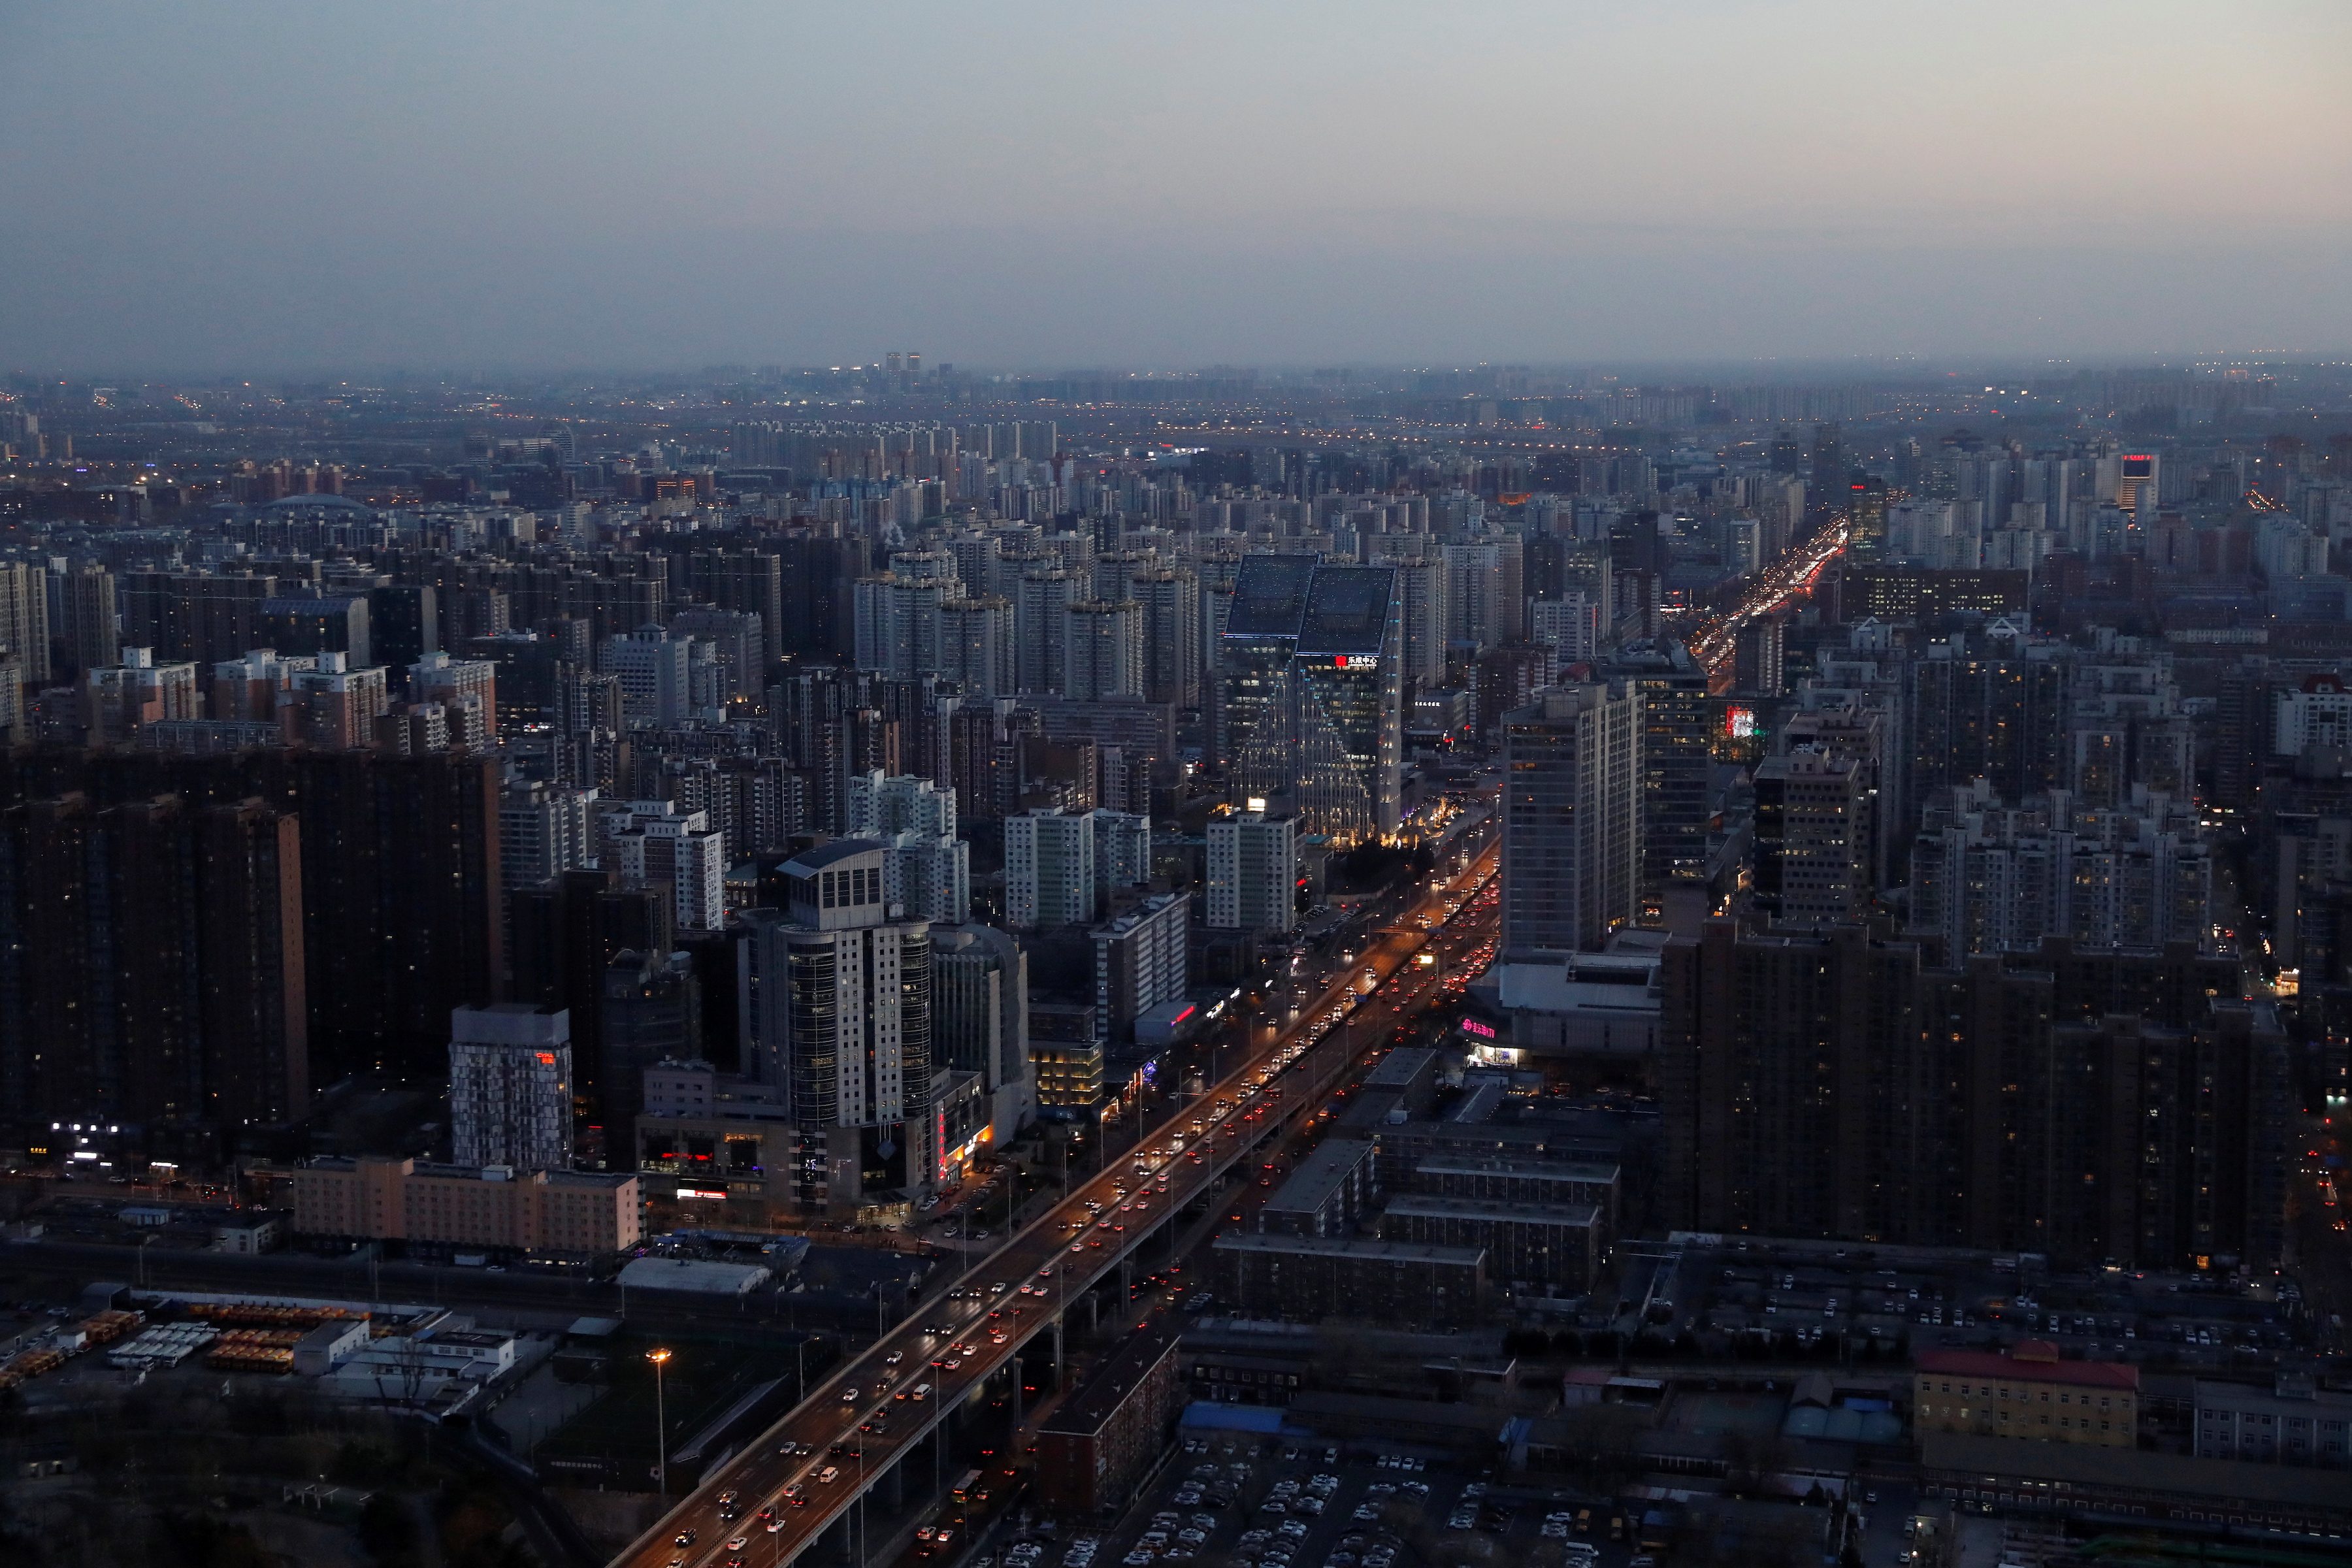 China’s economy picks up speed in Q4, ends 2020 in solid shape after COVID-19 shock